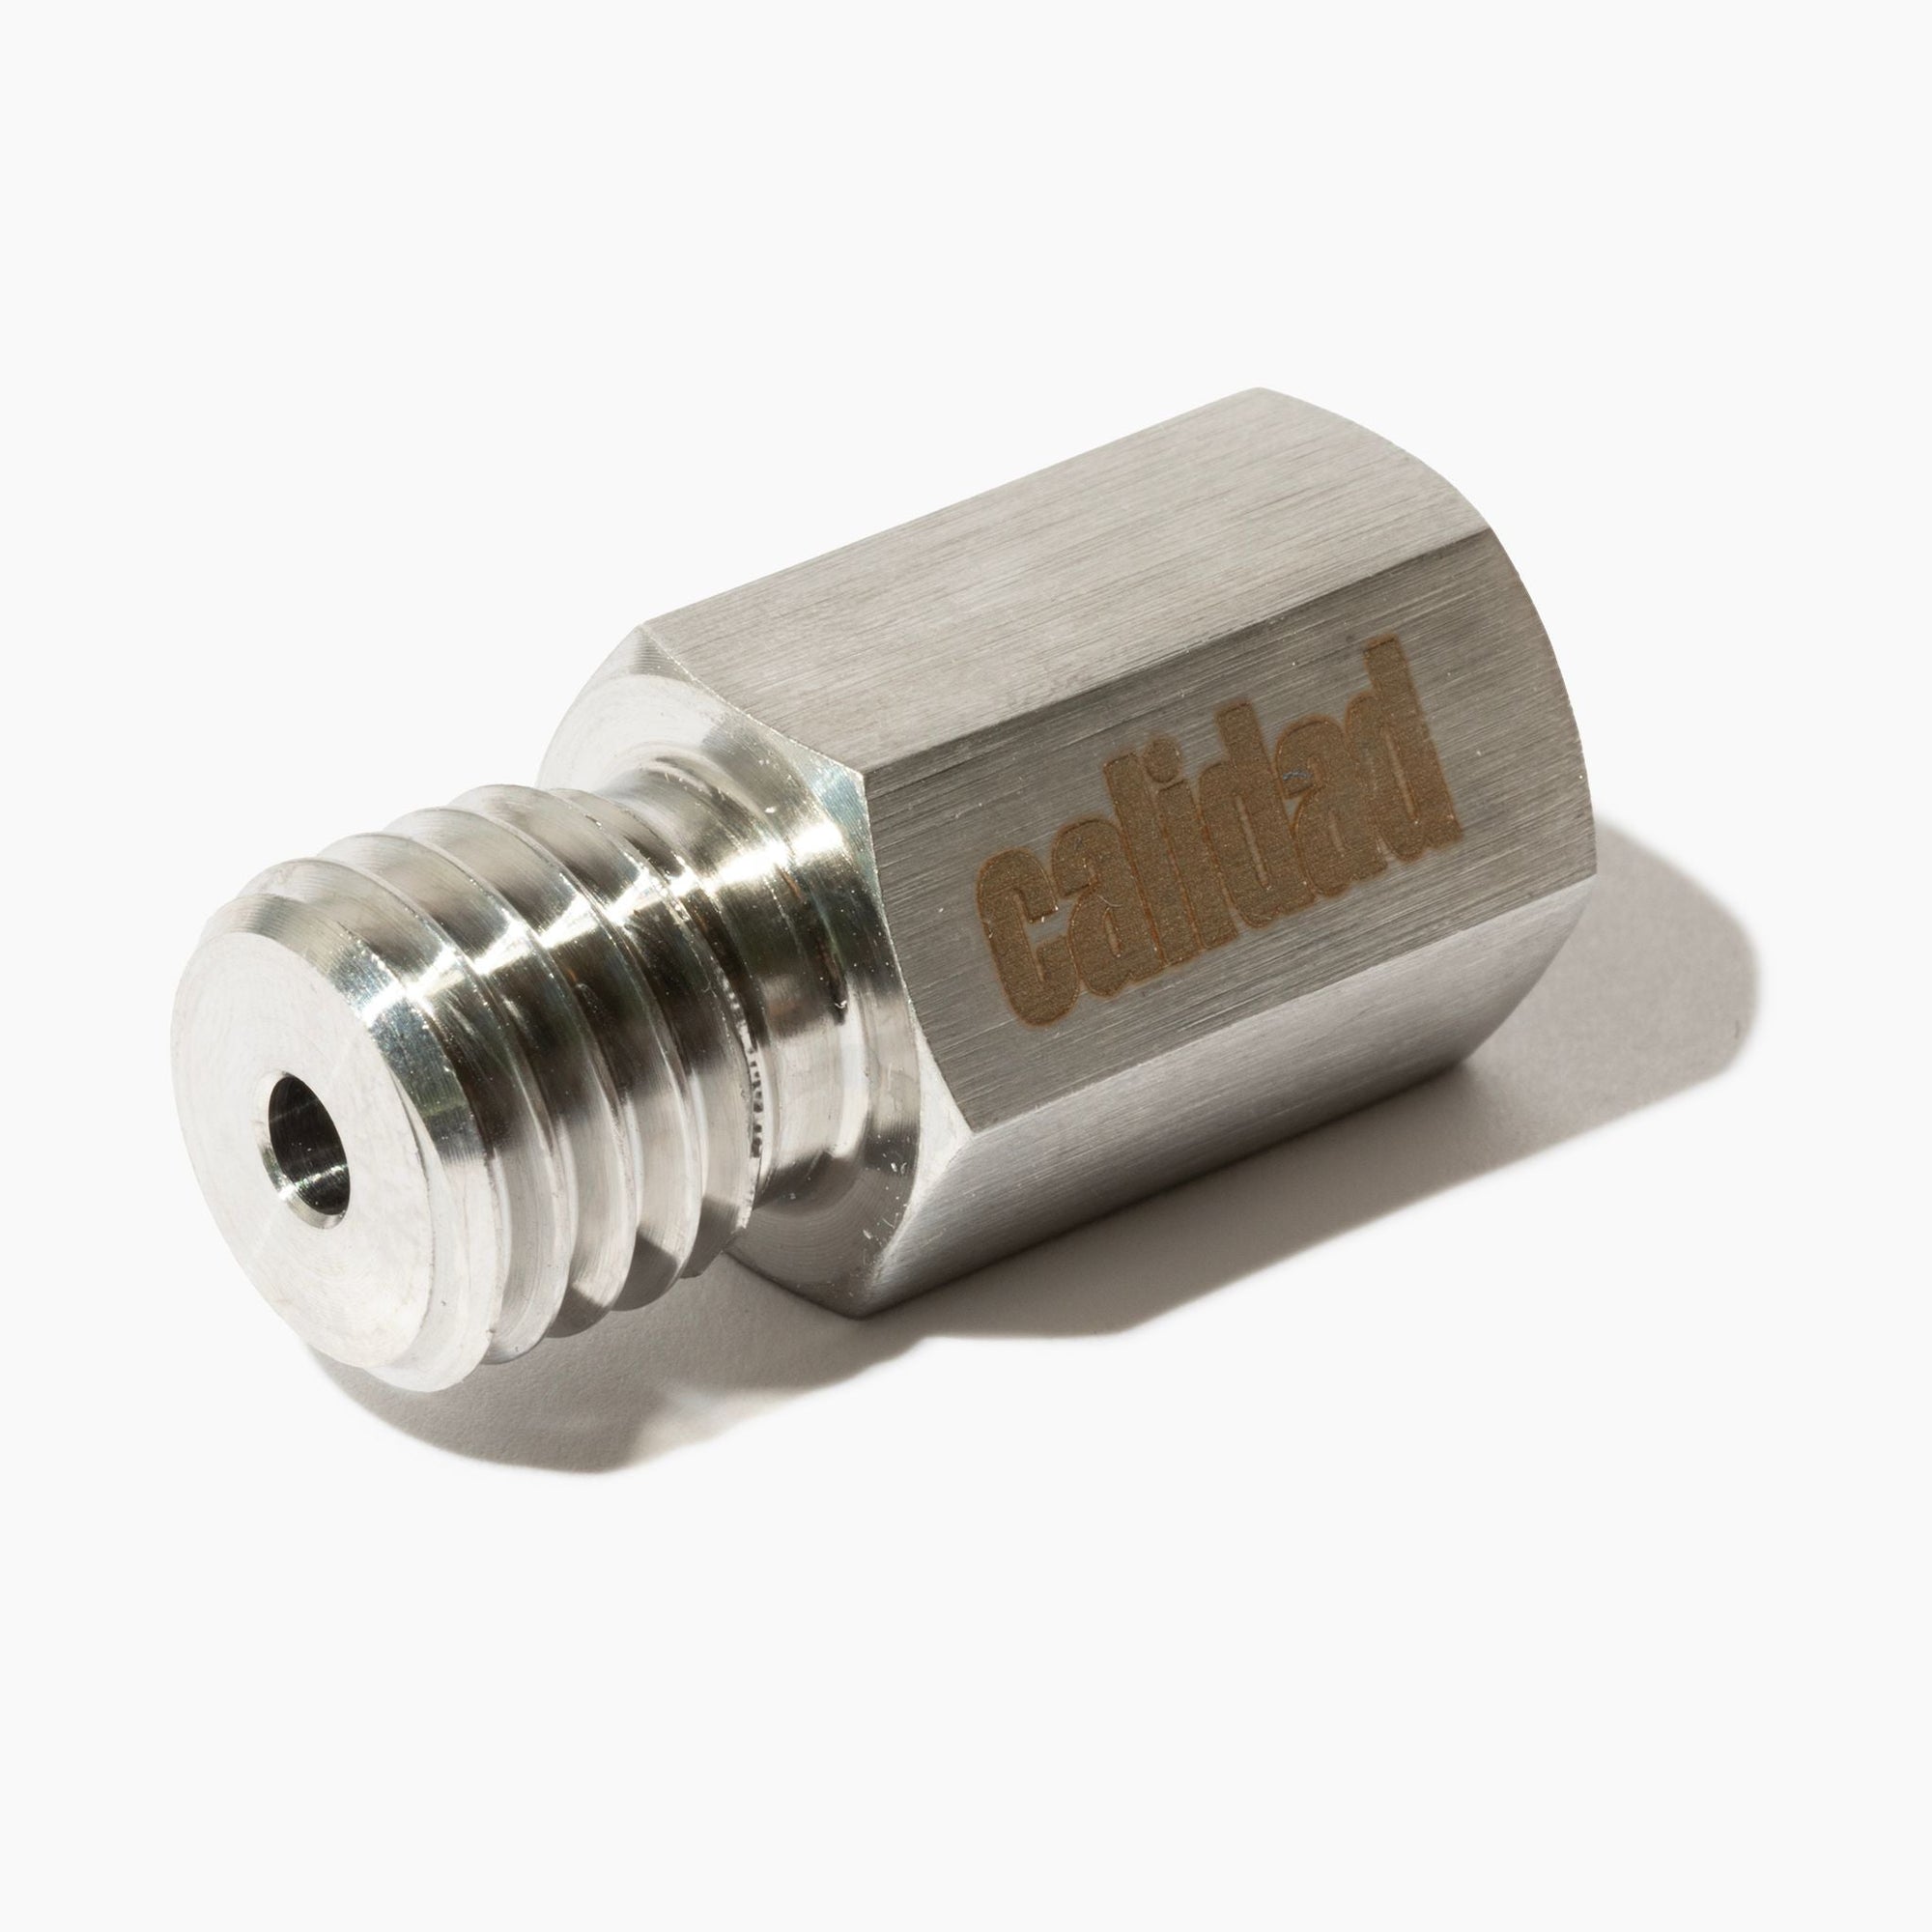 The adapter converts your M14 arbor to 5/8"-11 threaded hub for 5/8"-11 male threaded connector